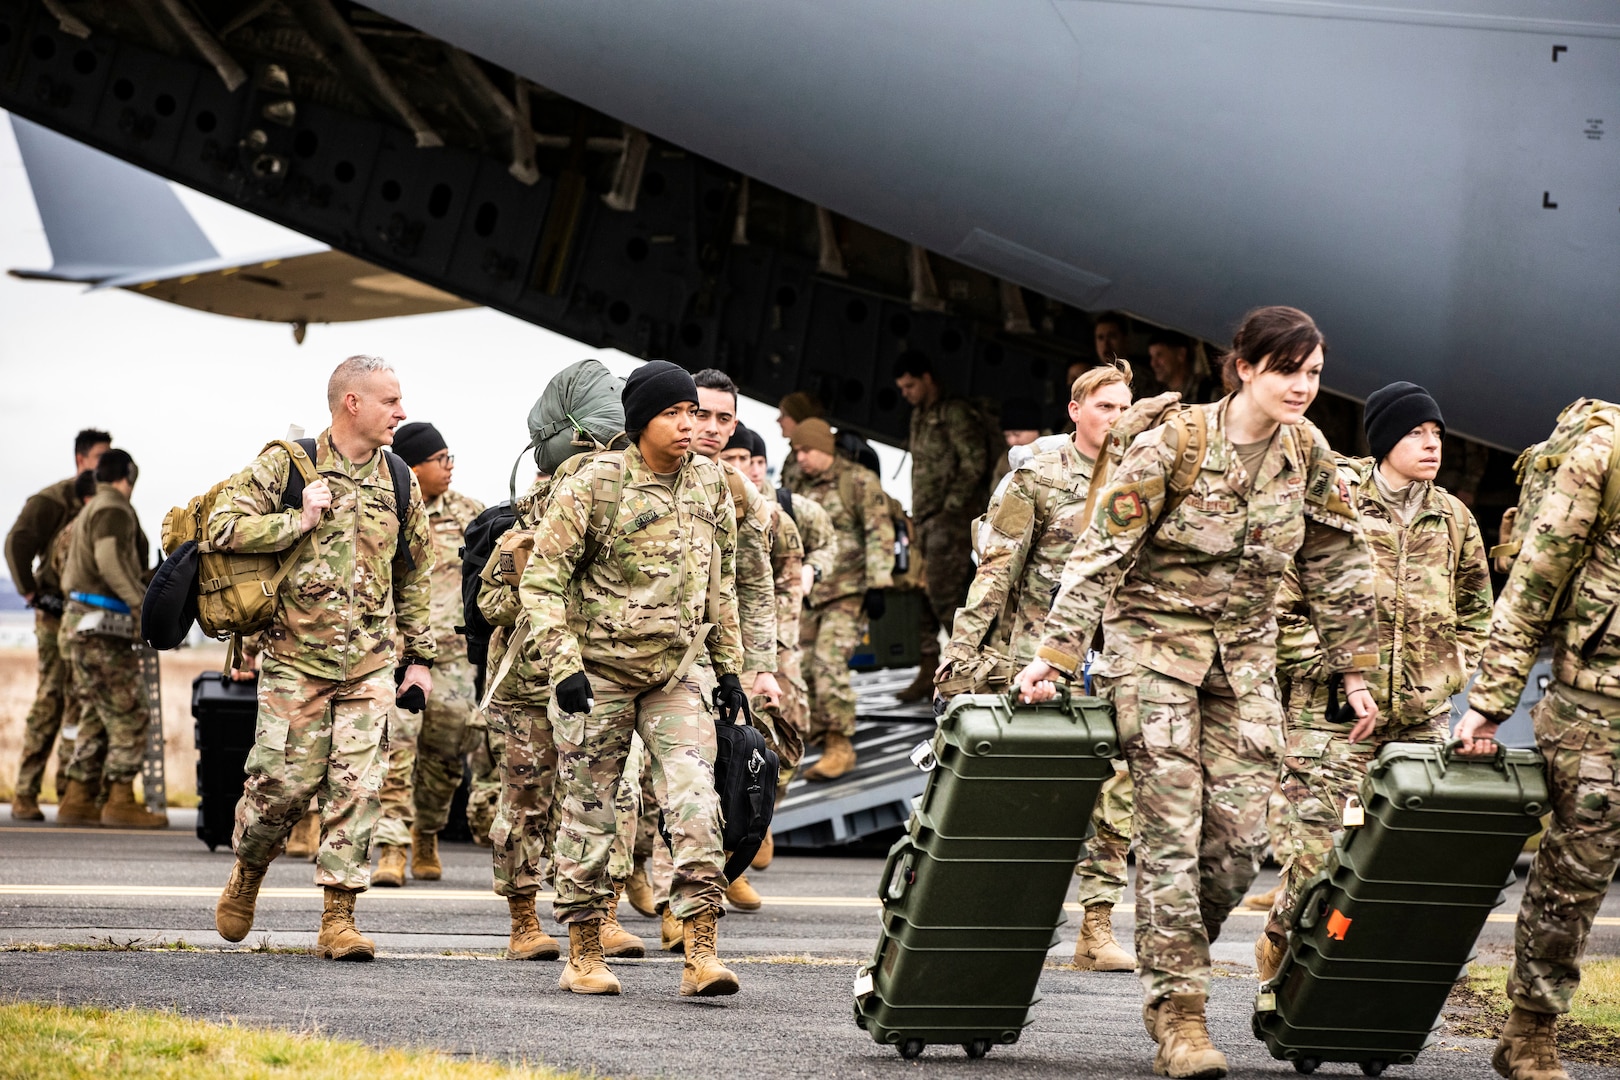 Soldiers of the XVIII Airborne Corps arrive in Wiesbaden, Germany, in support of NATO allies, Feb. 4, 2022.